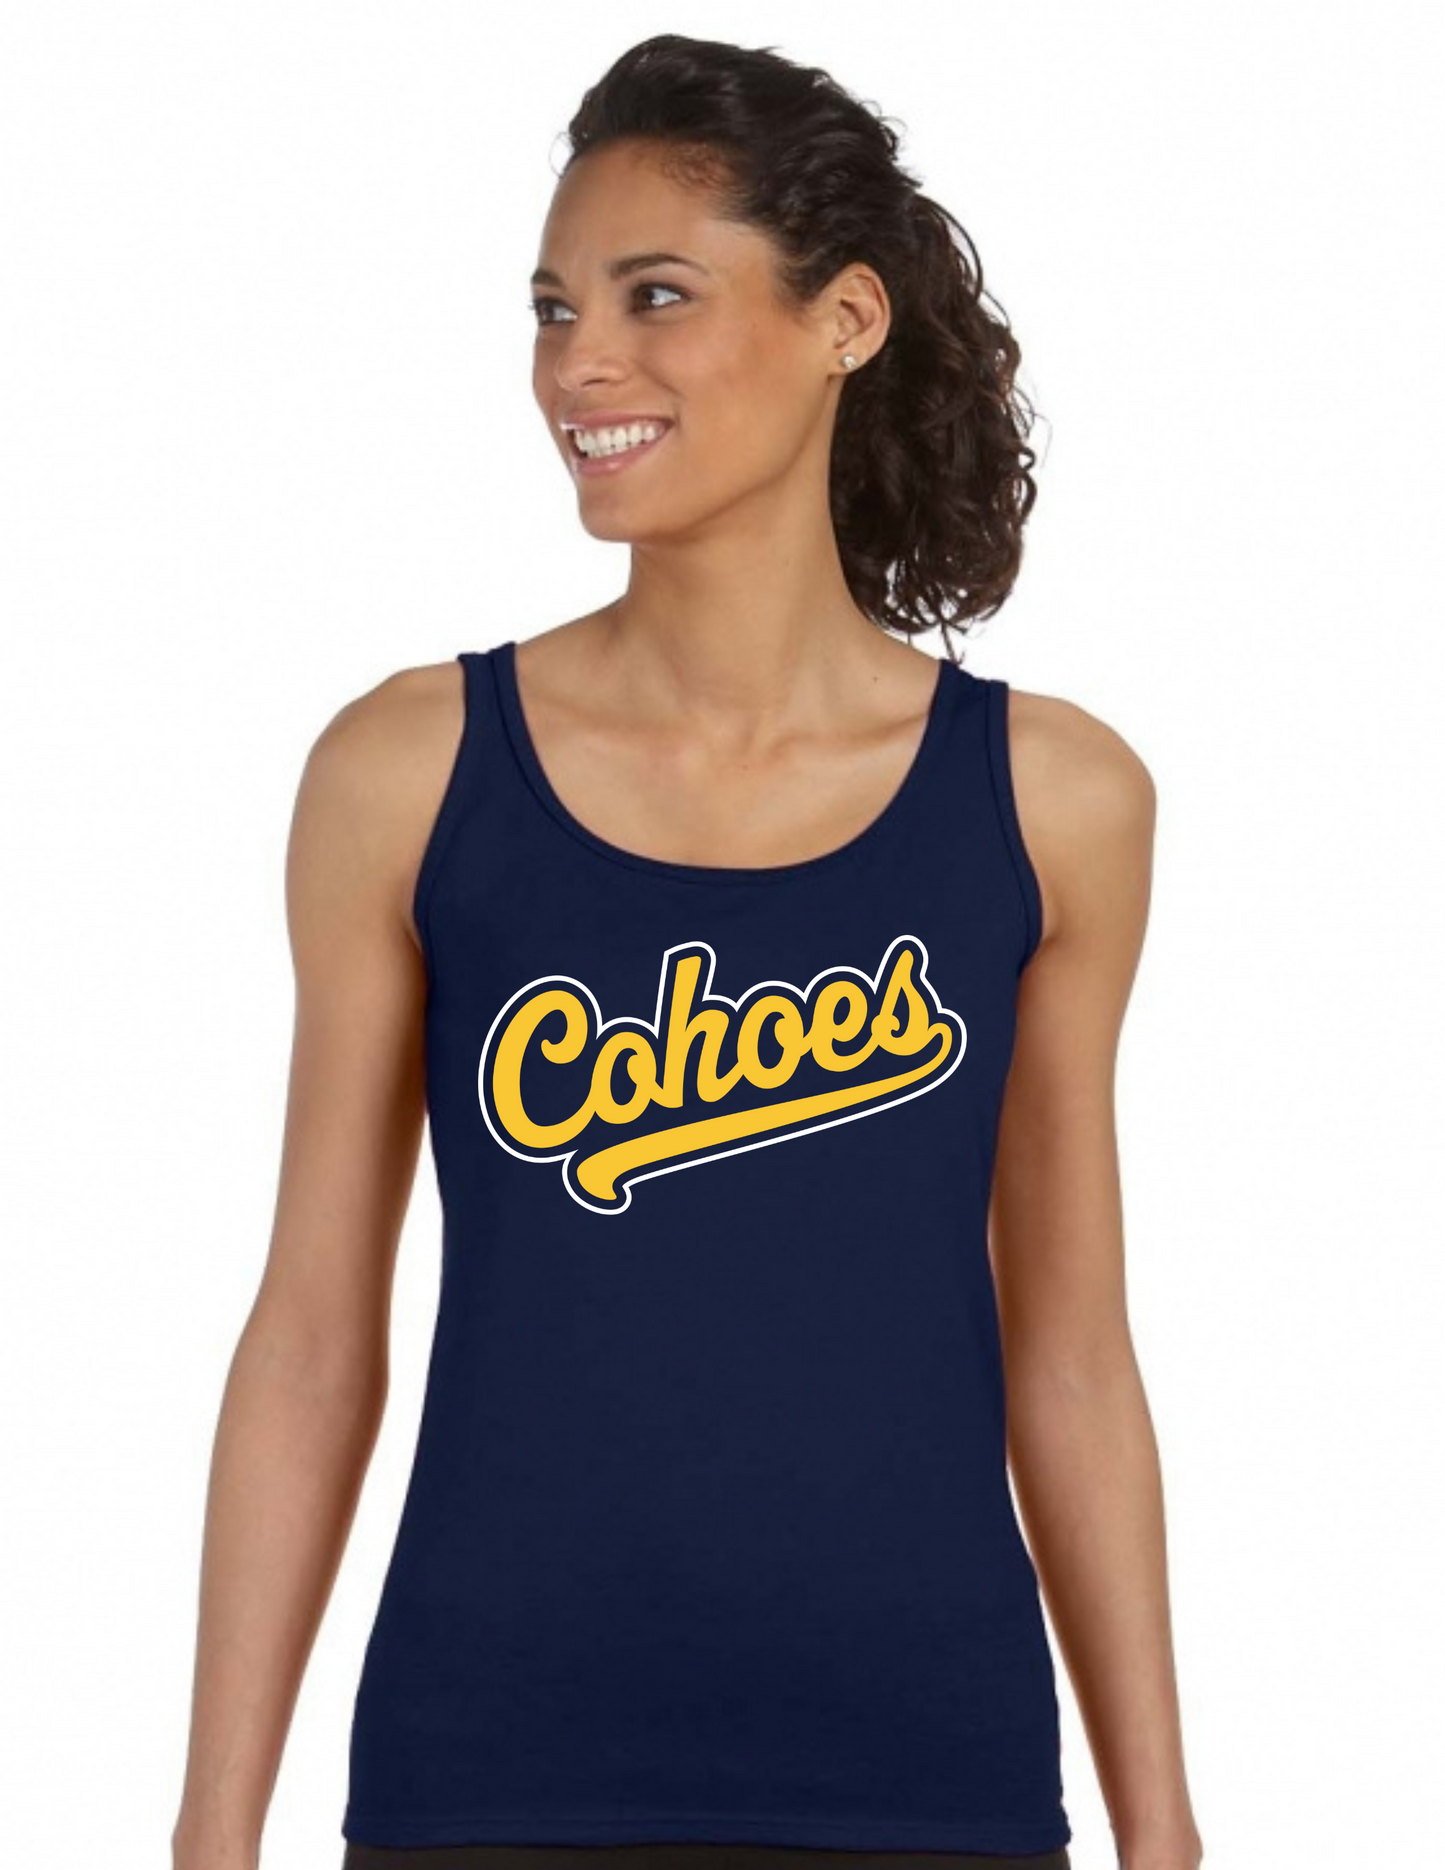 Cohoes Women's Soft Fitted Tank